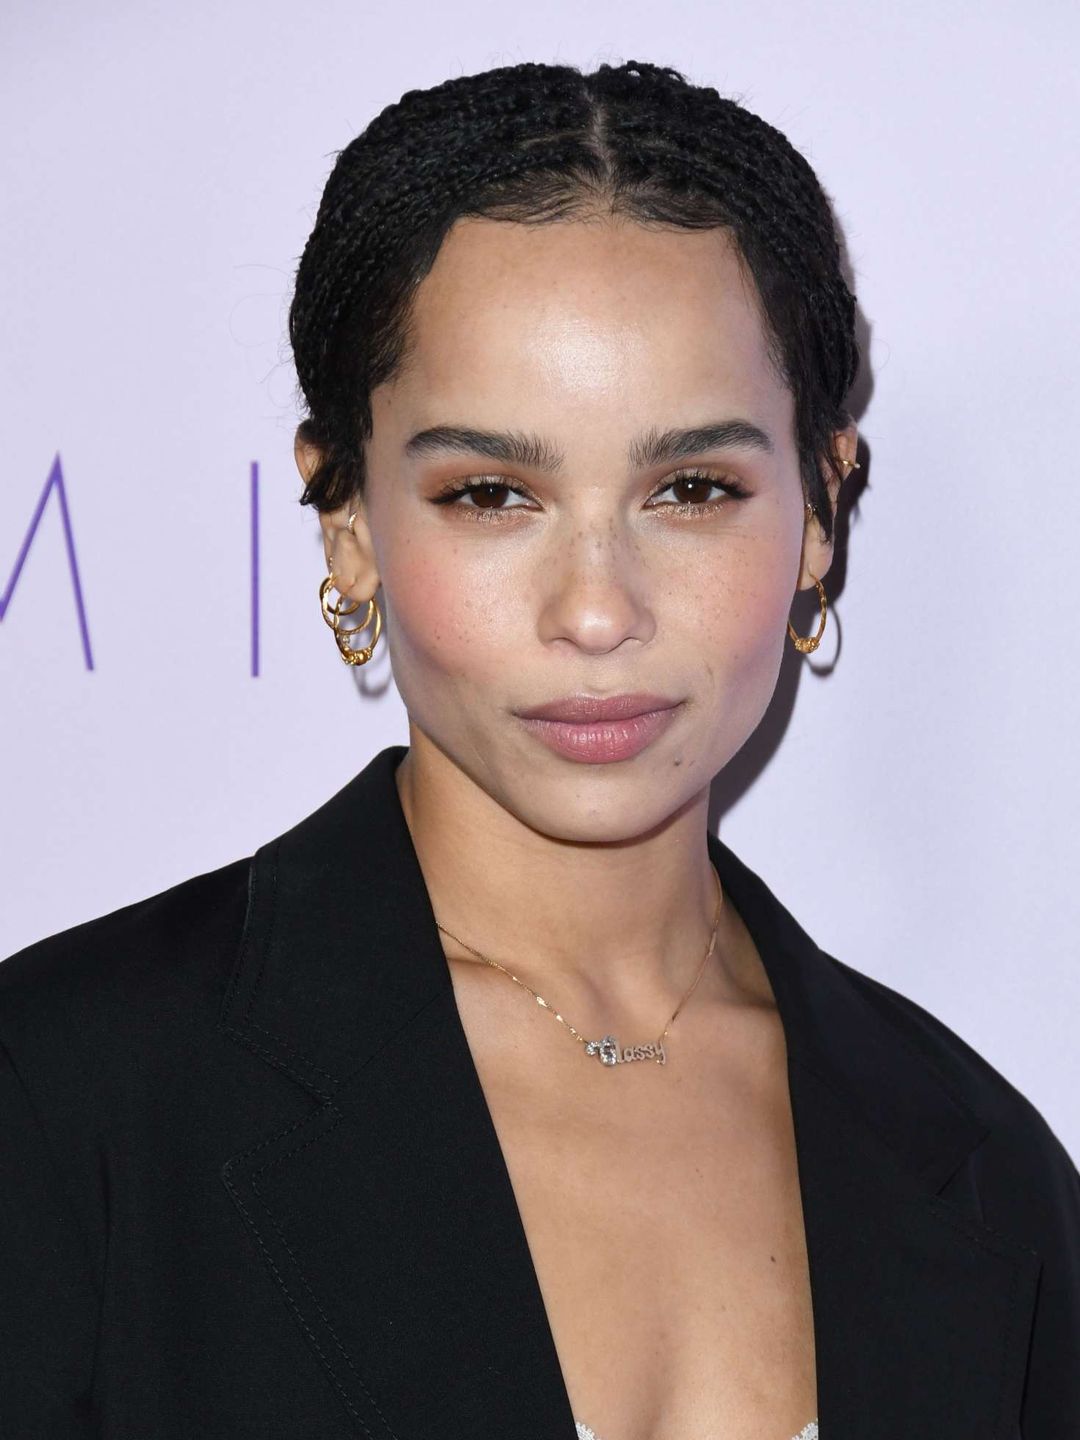 Zoe Kravitz who are her parents